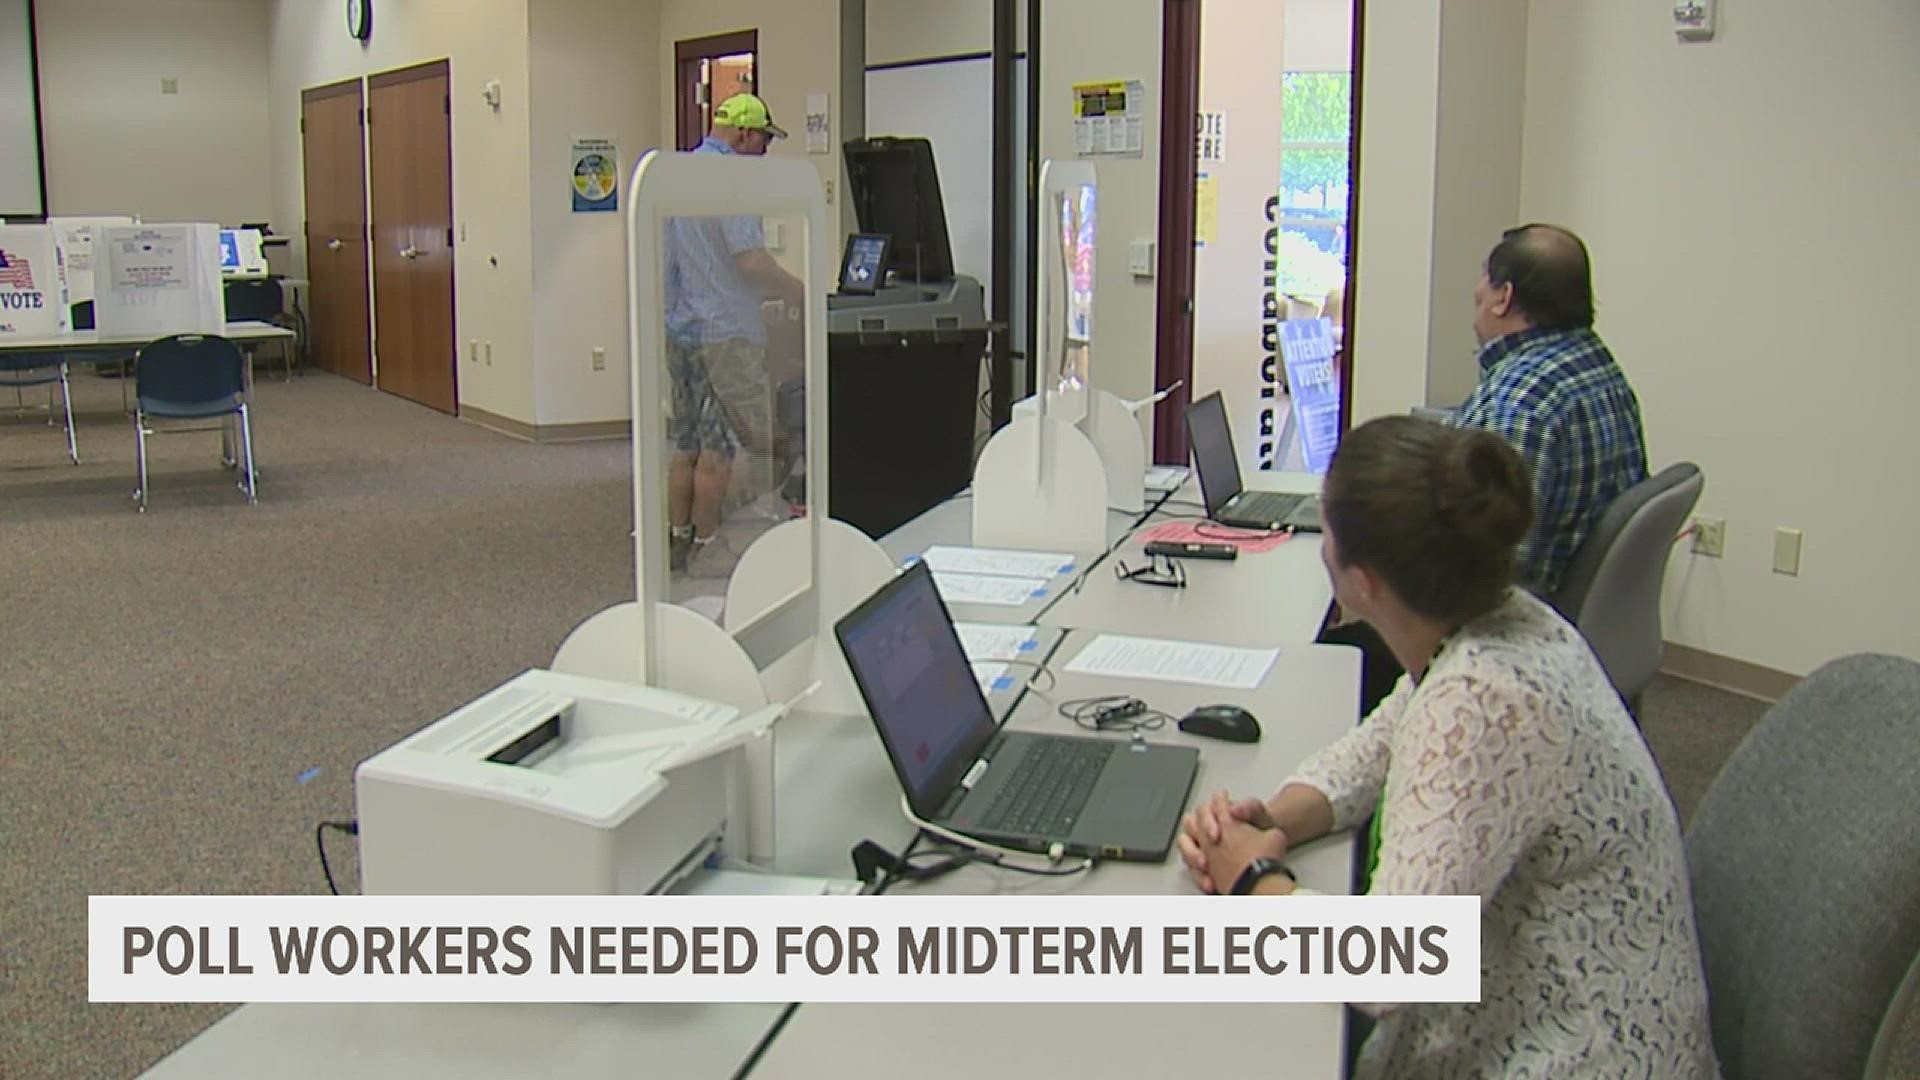 Iowa Sec. of State Paul Pate said his office launched "an aggressive effort" to recruit poll workers in 2020. Here's how you can help.